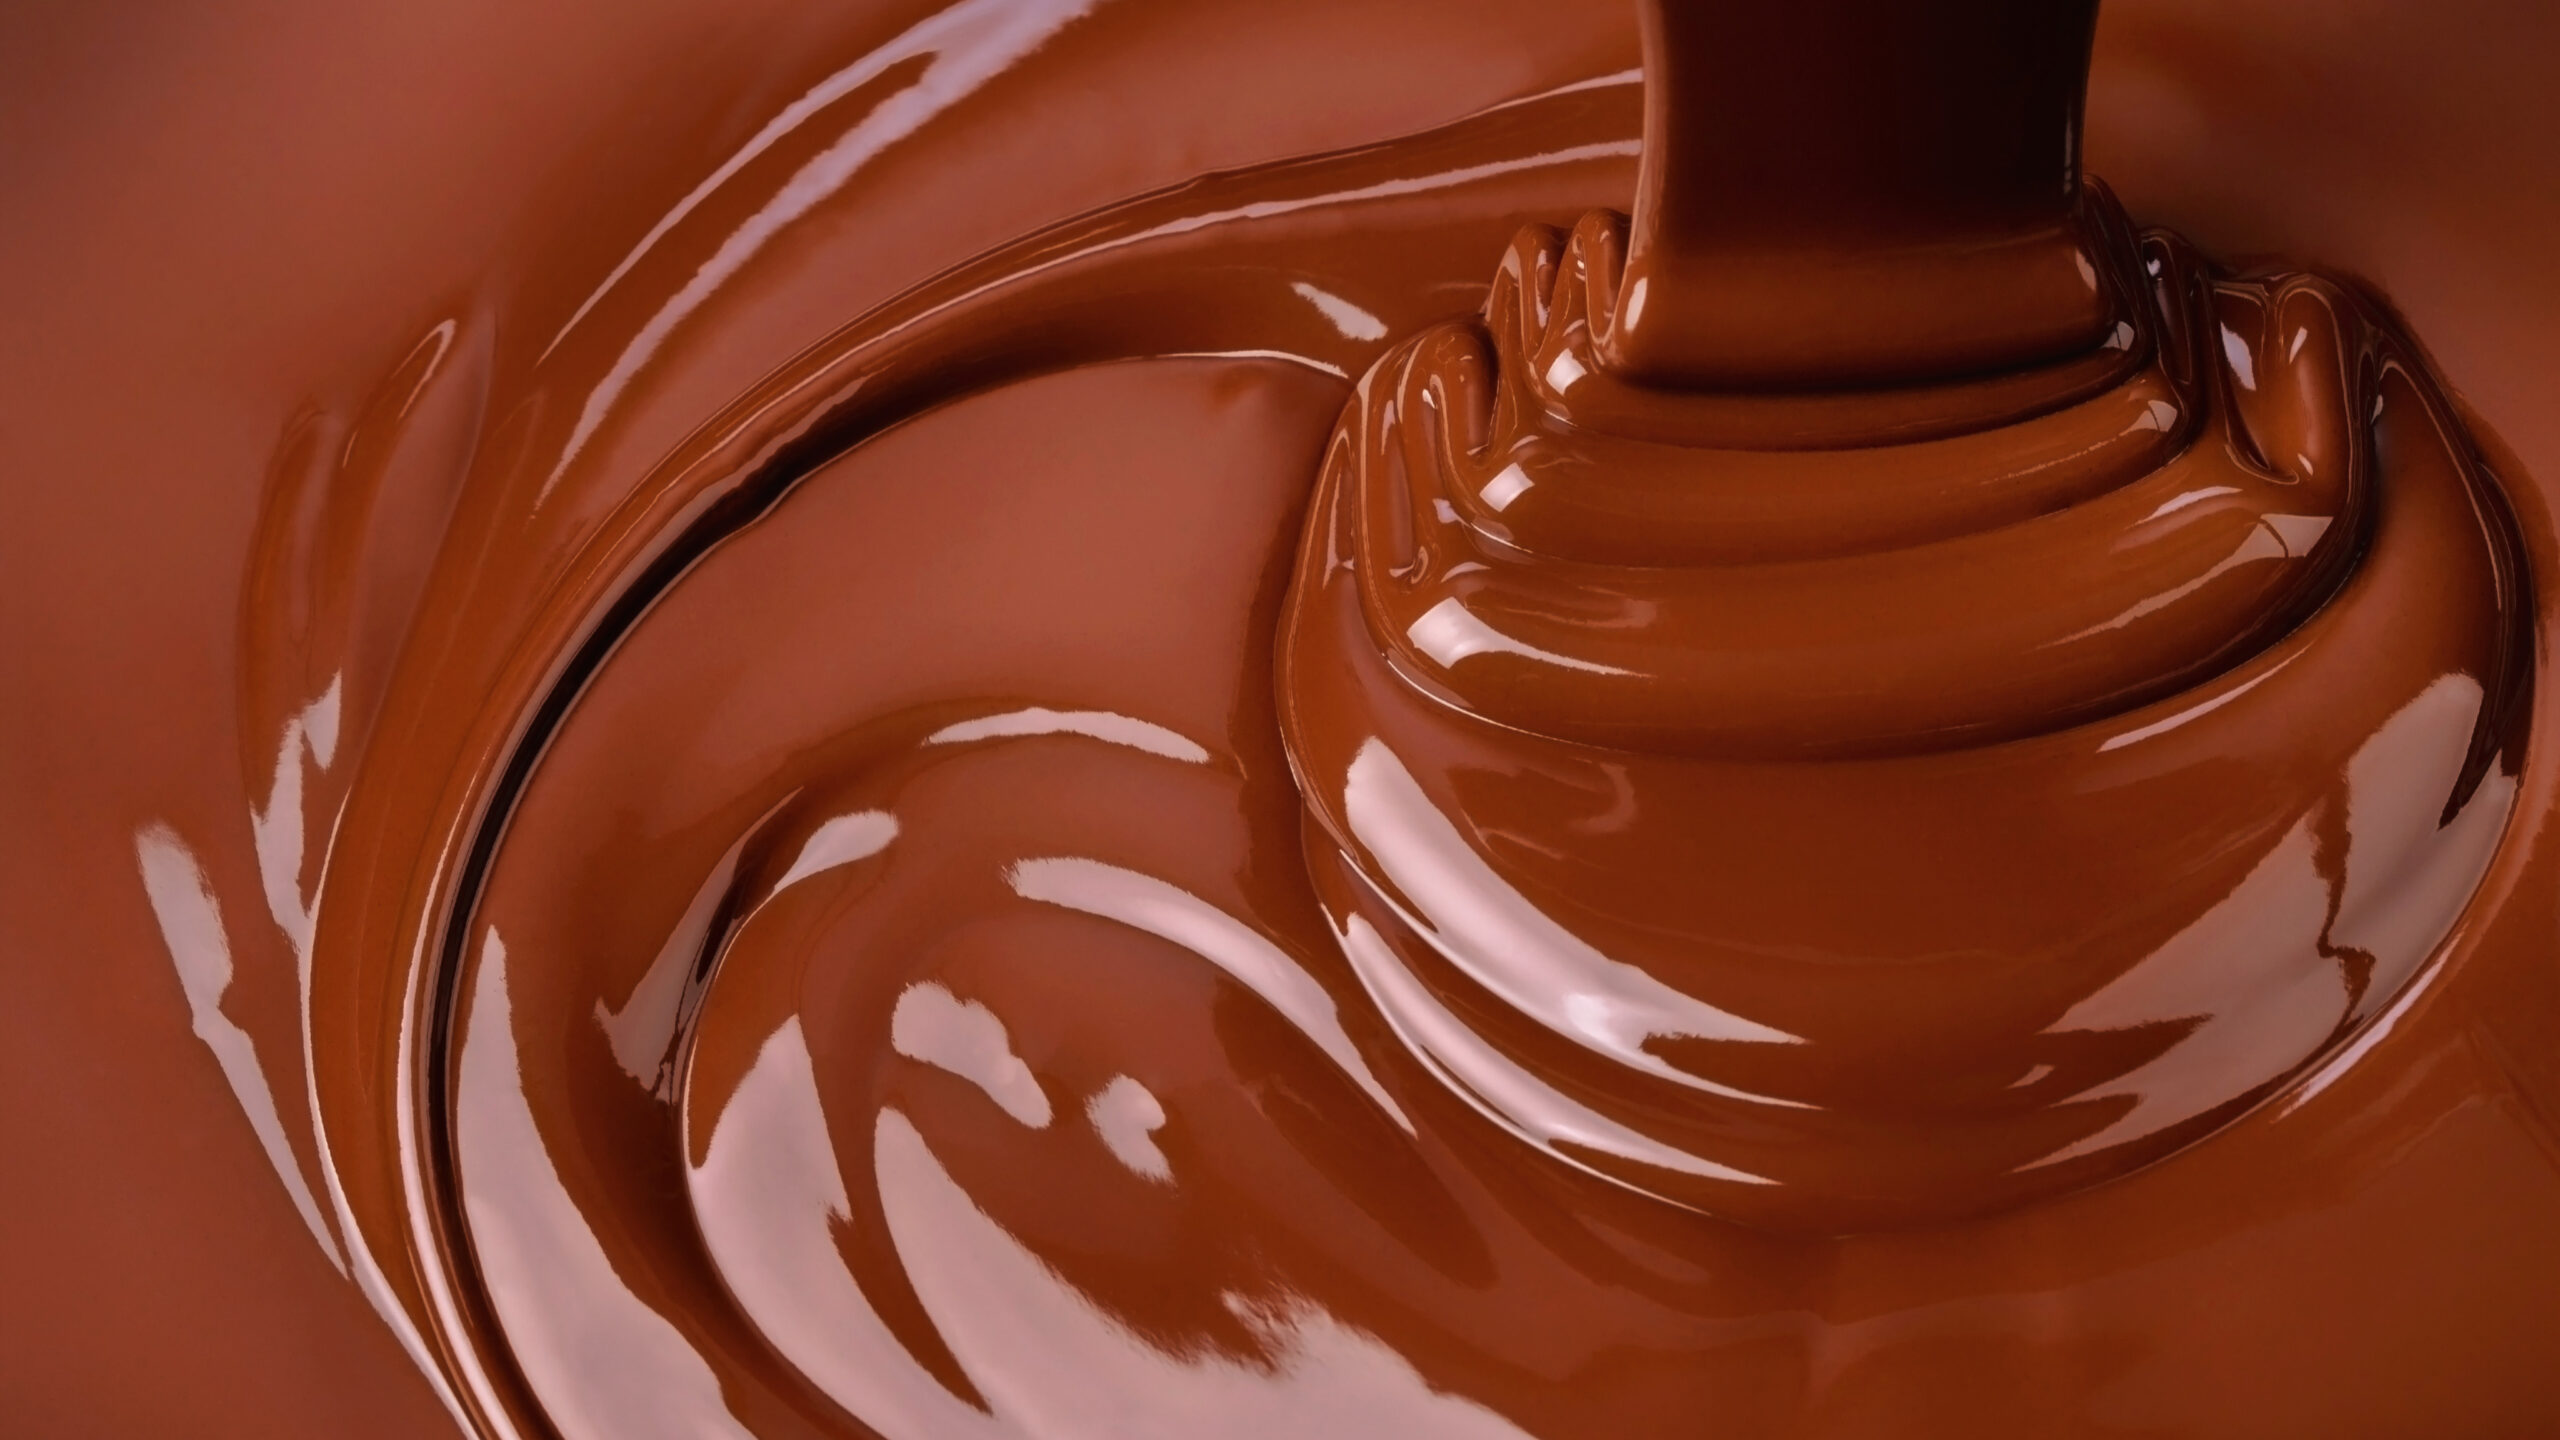 Woman Survived Factory Explosion After Falling Into Vat Of Melted Chocolate: Report